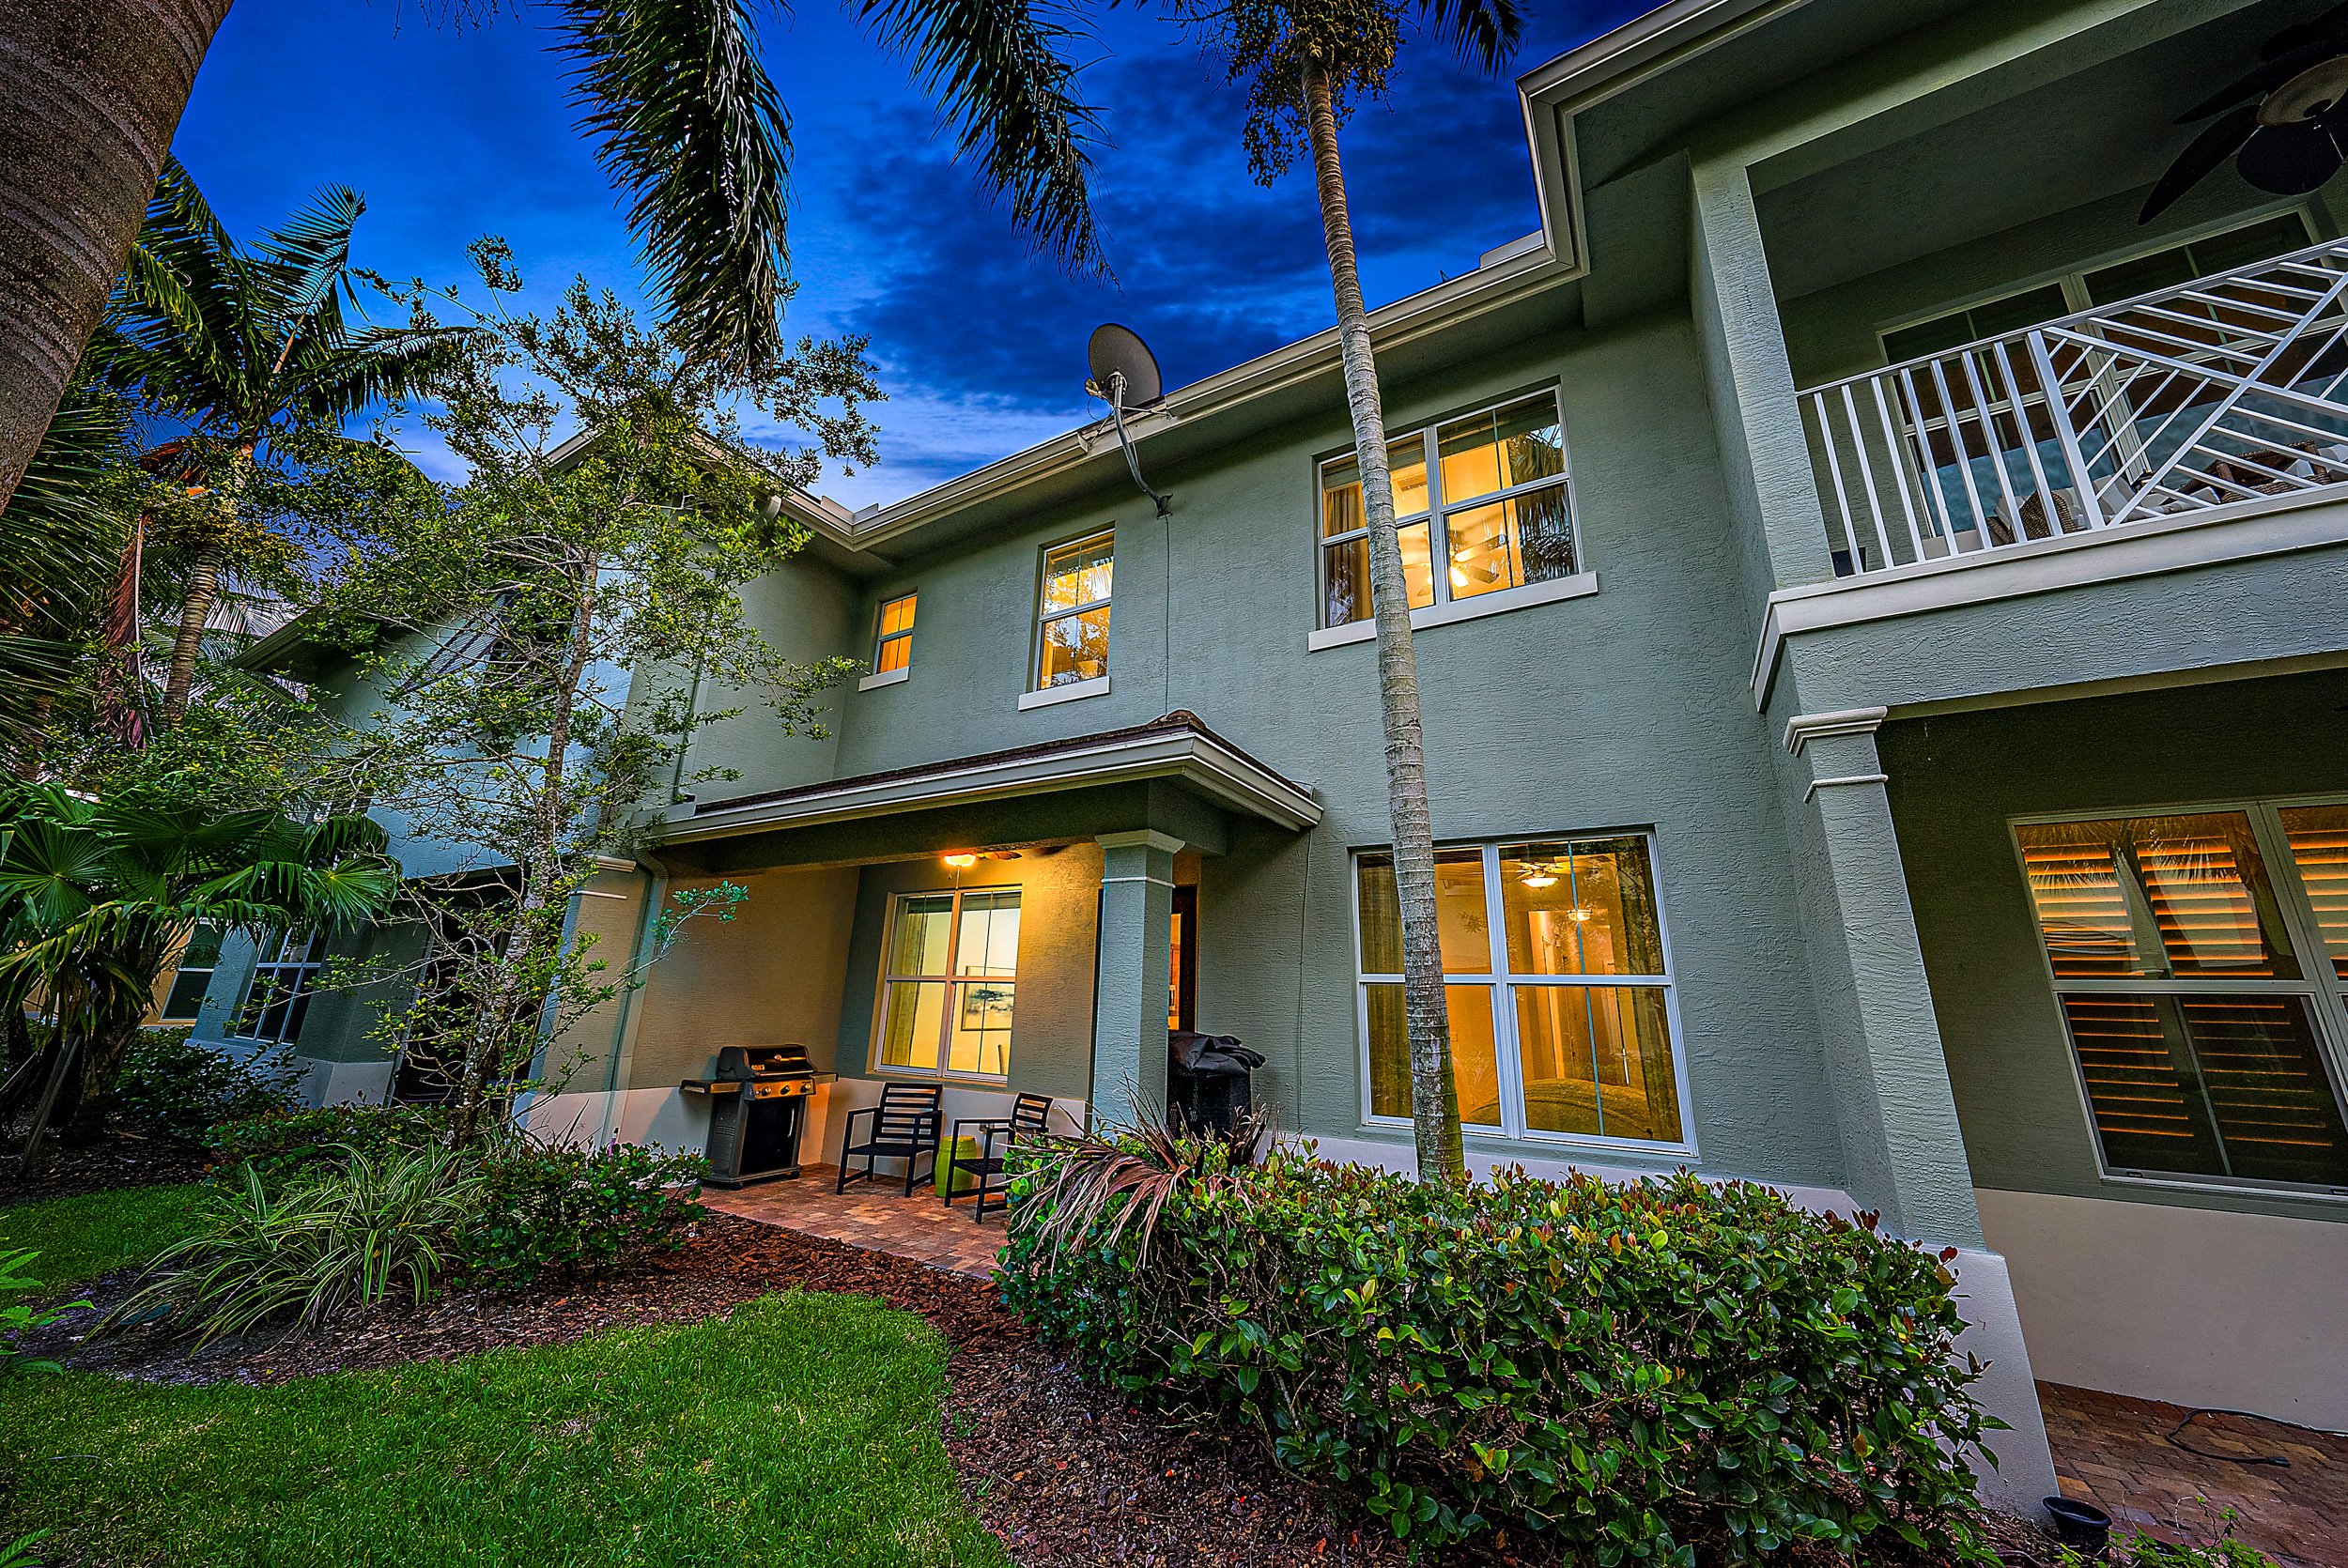 3 bedroom, 2.5 bathroom townhome listed for sale at hampton cay, palm beach county